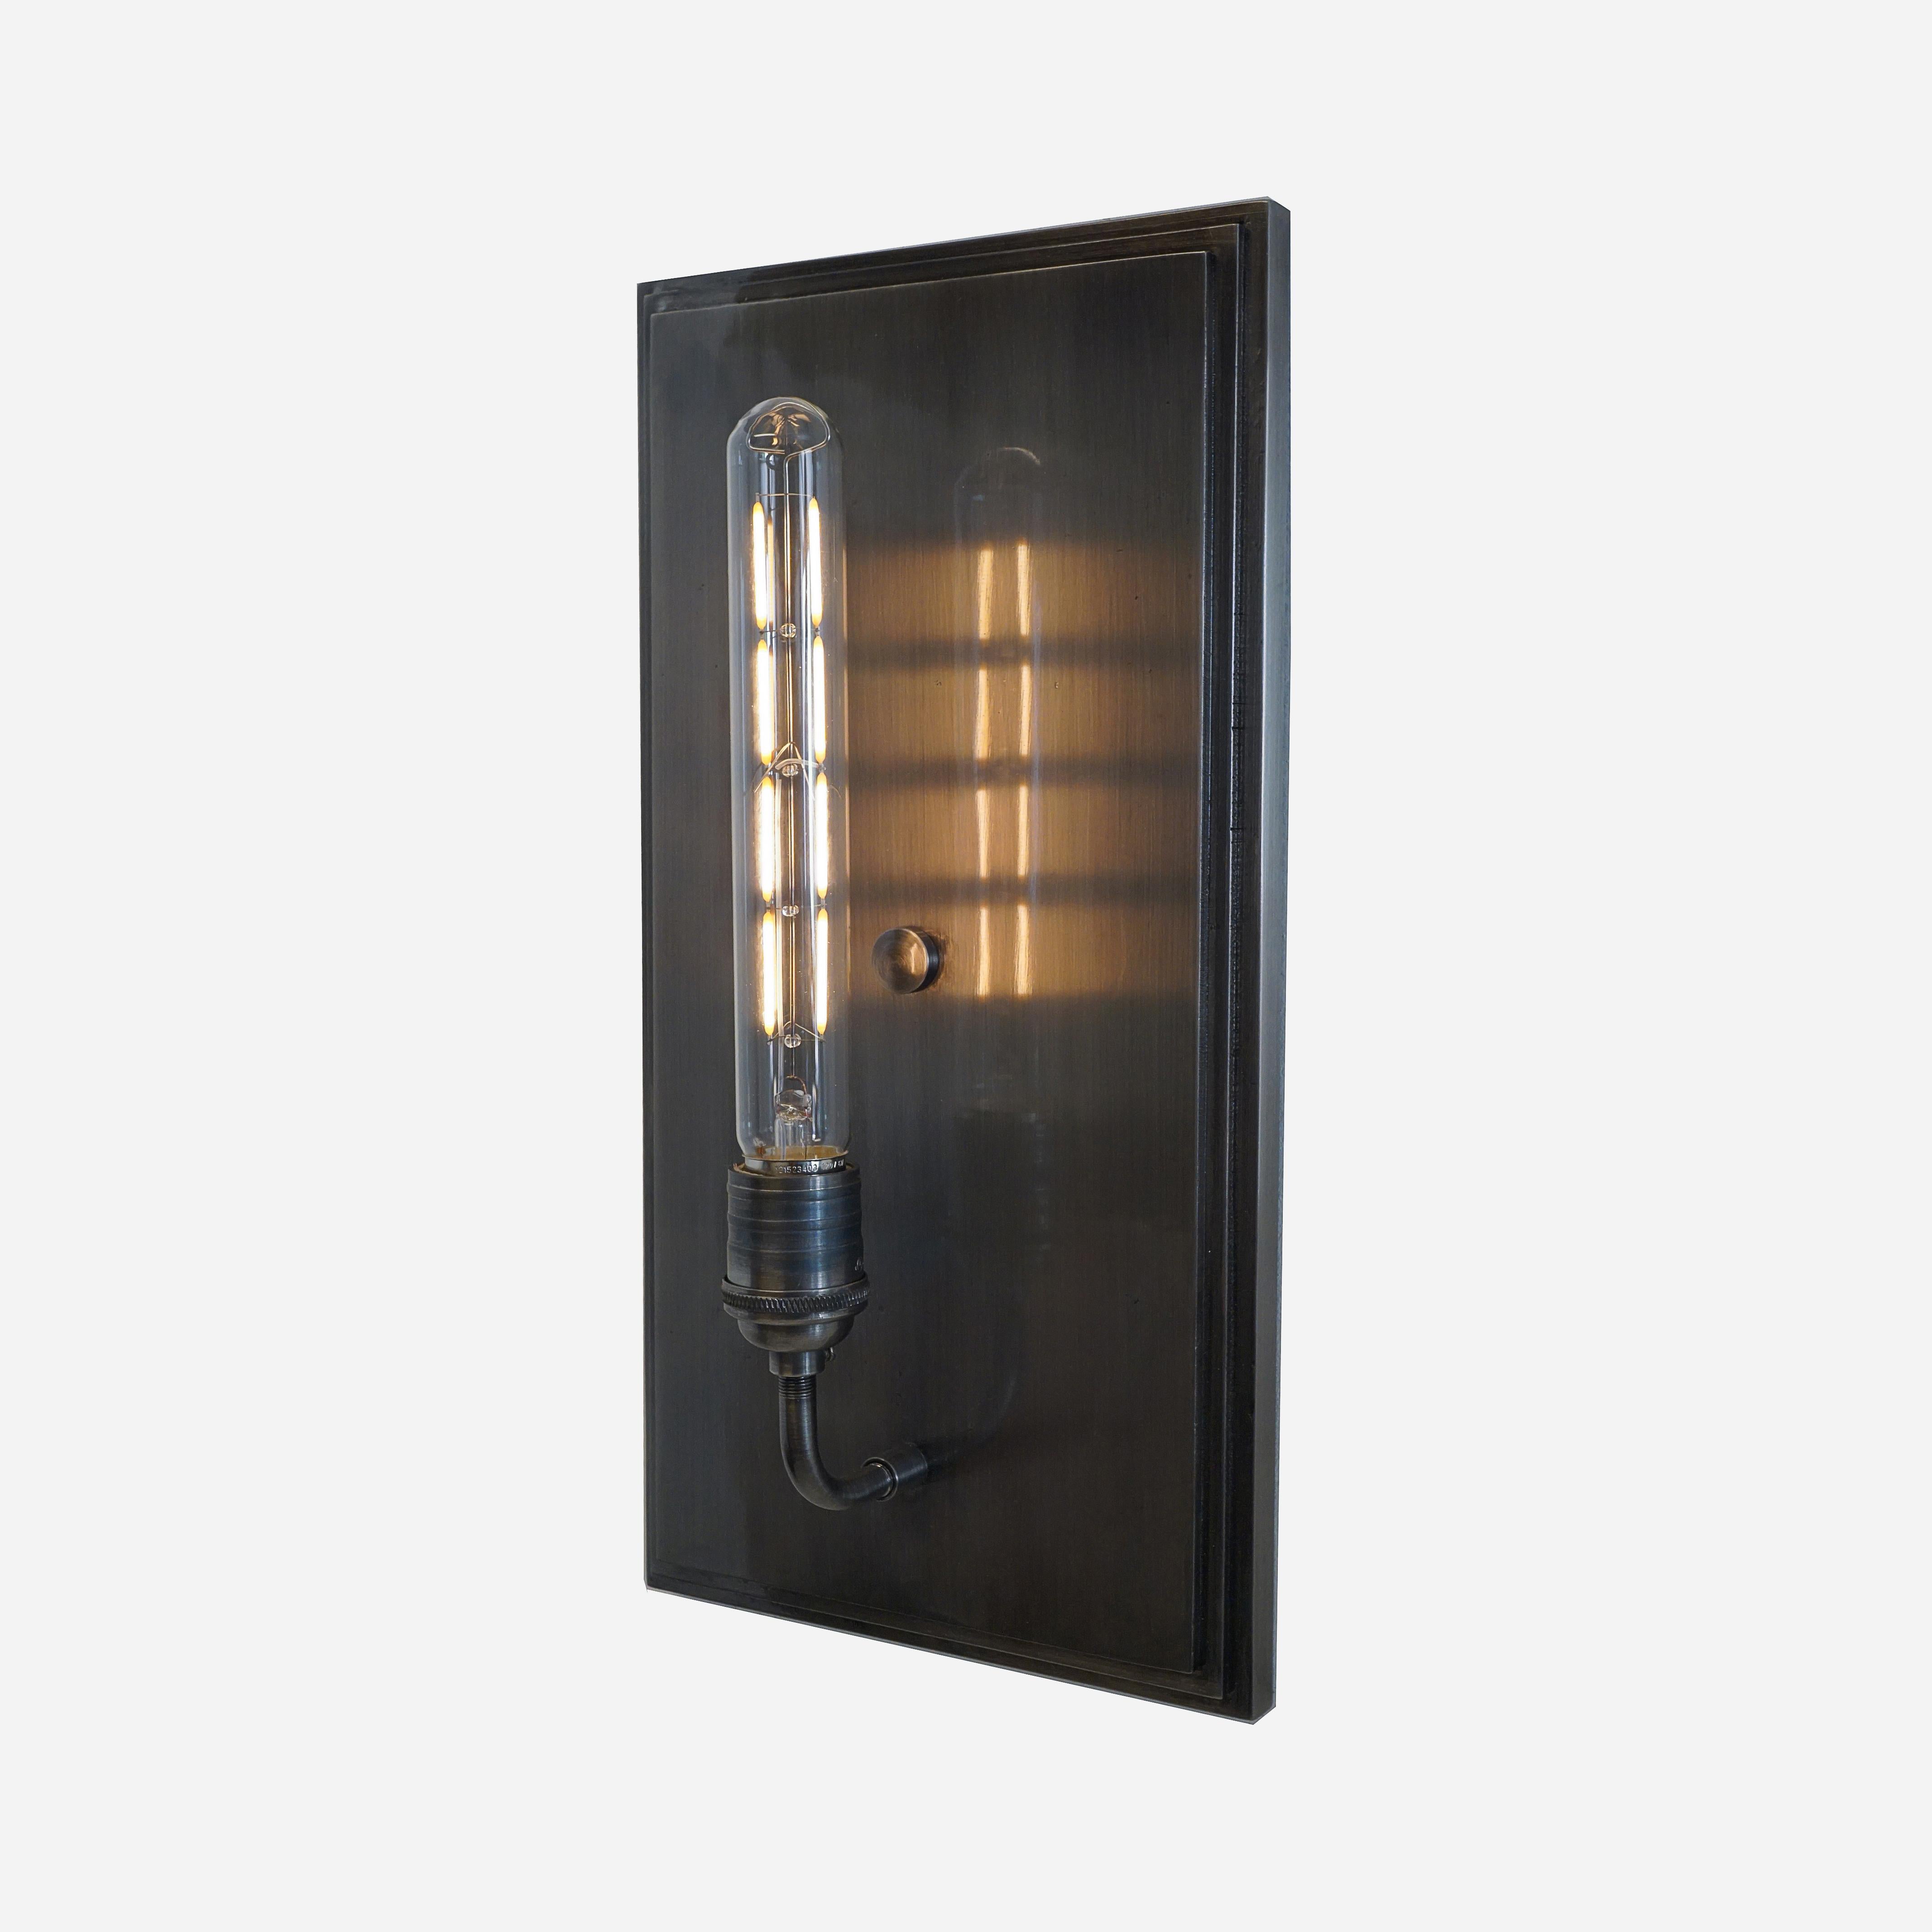 American Moderne Art Deco Inspired Contemporary Interior Wall Sconce - Black Matte Finish For Sale